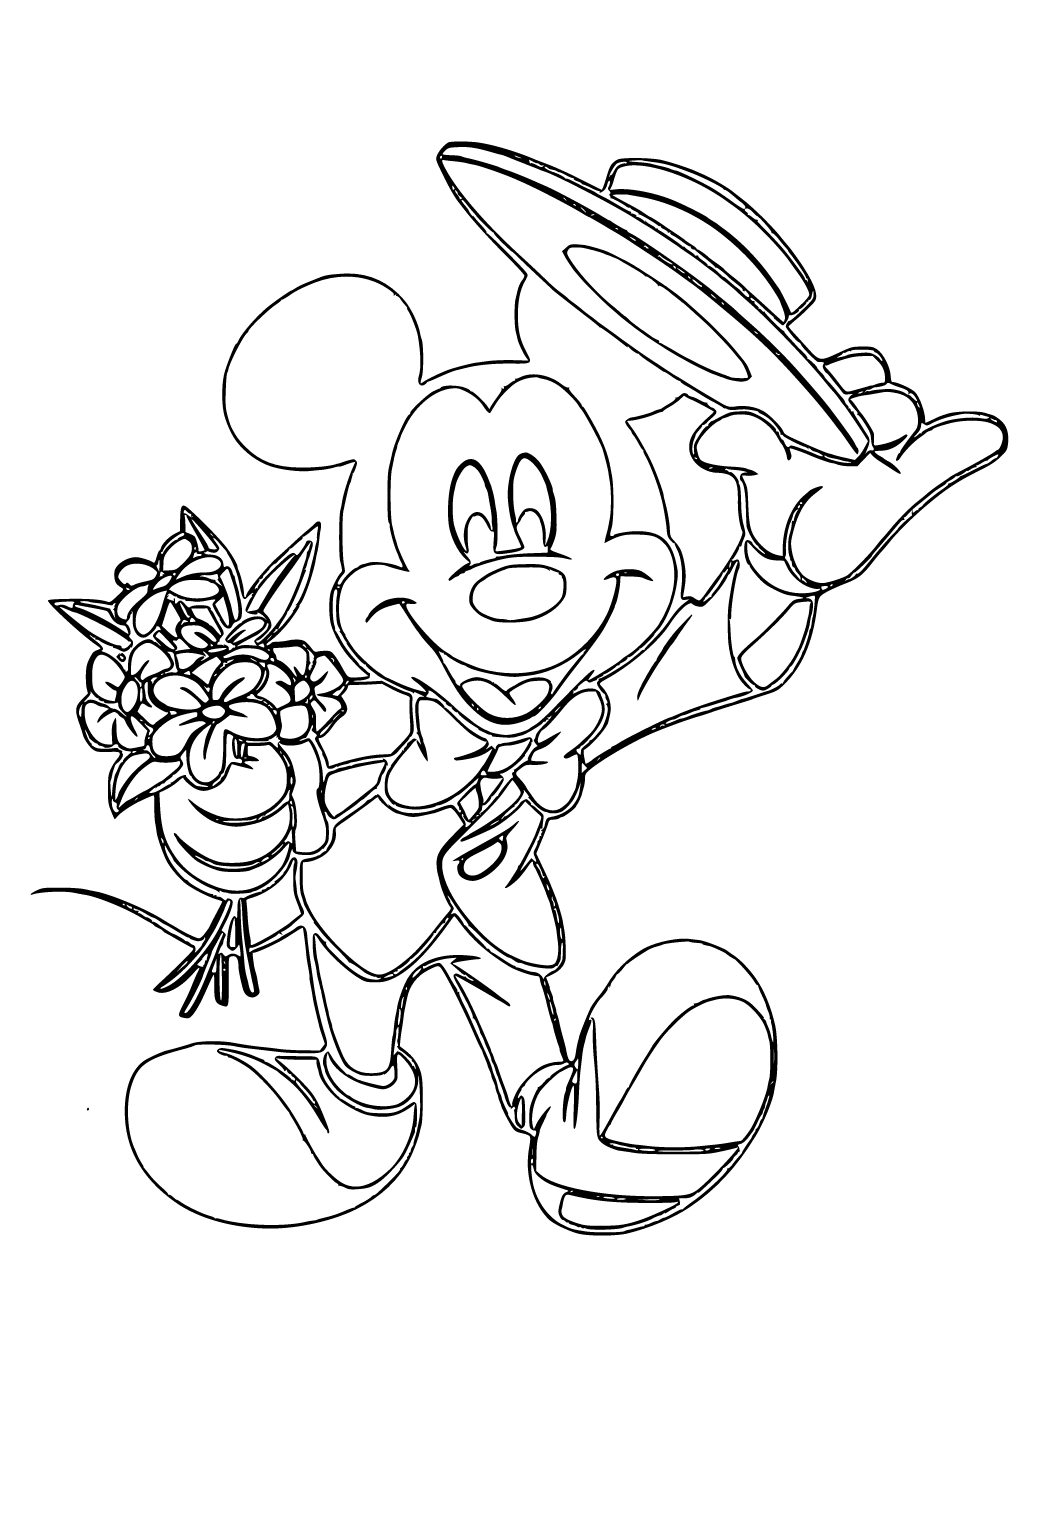 free-printable-mickey-mouse-flowers-coloring-page-for-adults-and-kids